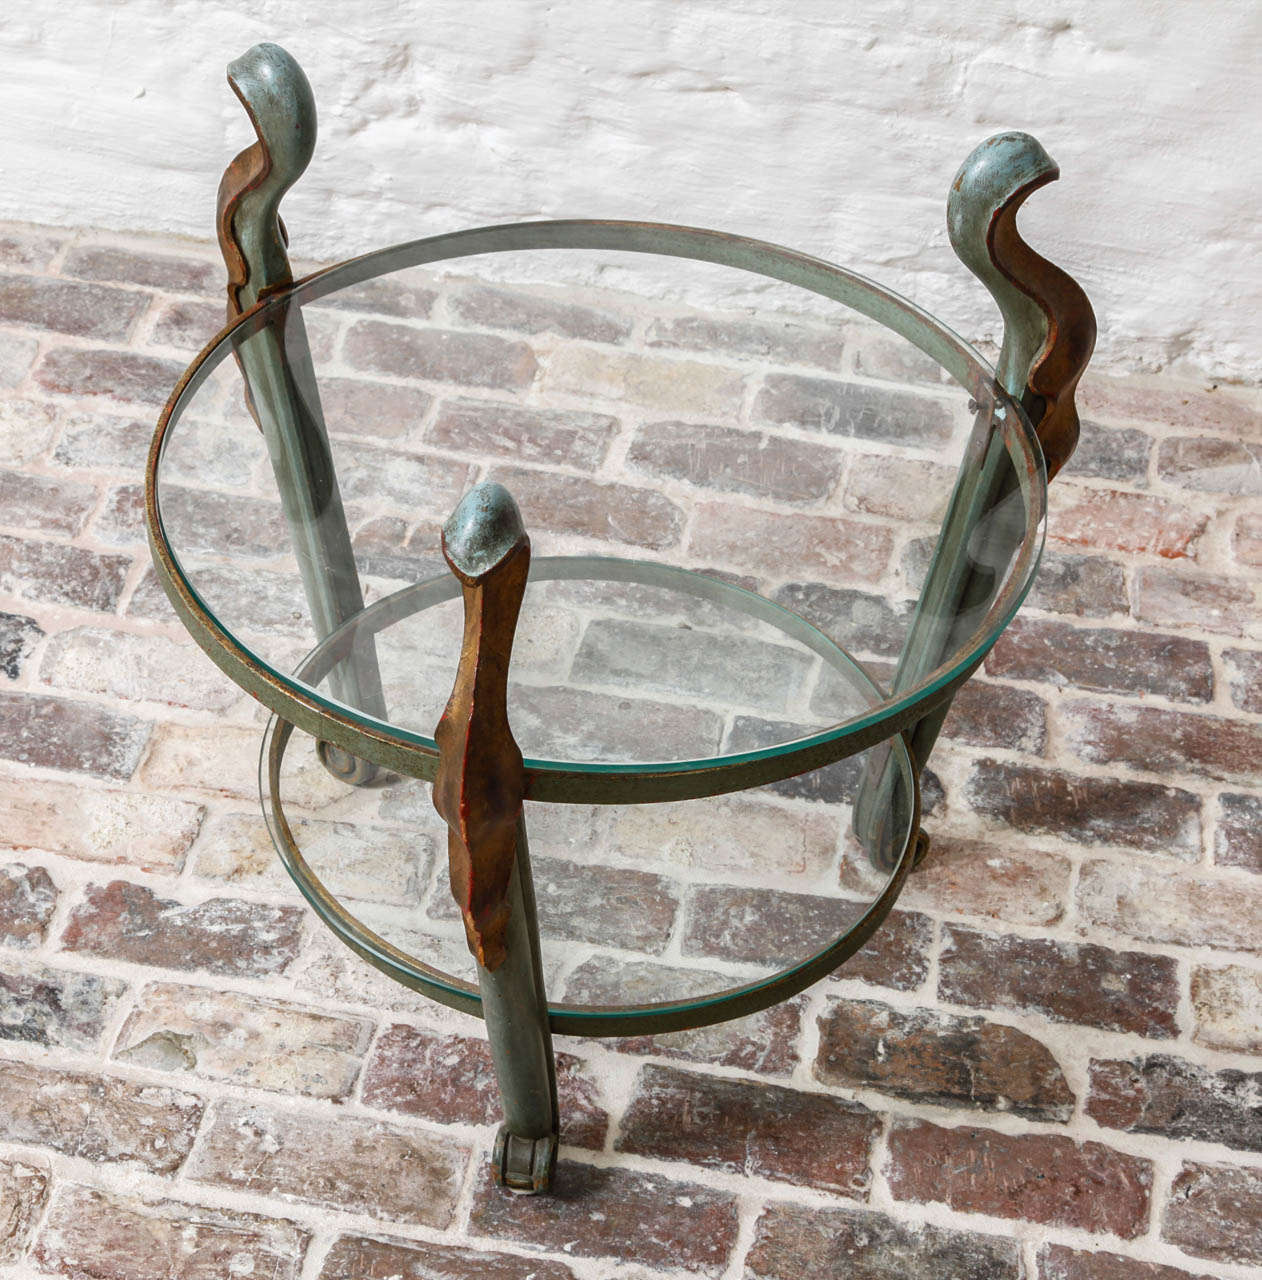 belgian art nouveau coffee table,
two glas tops
wooden frame in gold and faded moss green paint